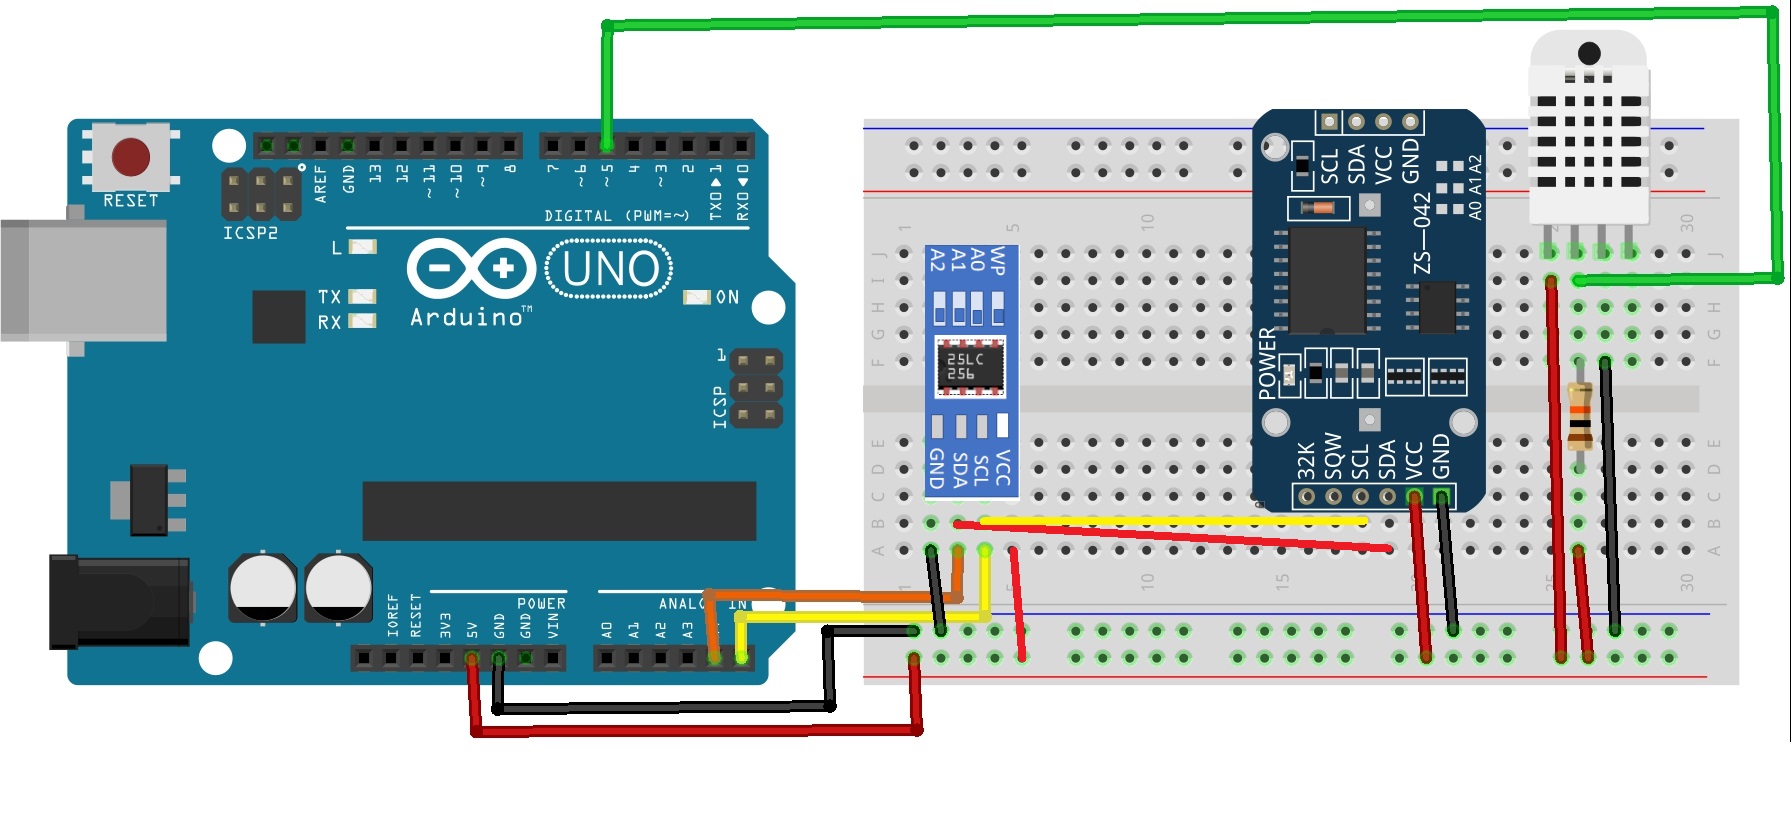 How to Reduce Power Consumption on the Arduino